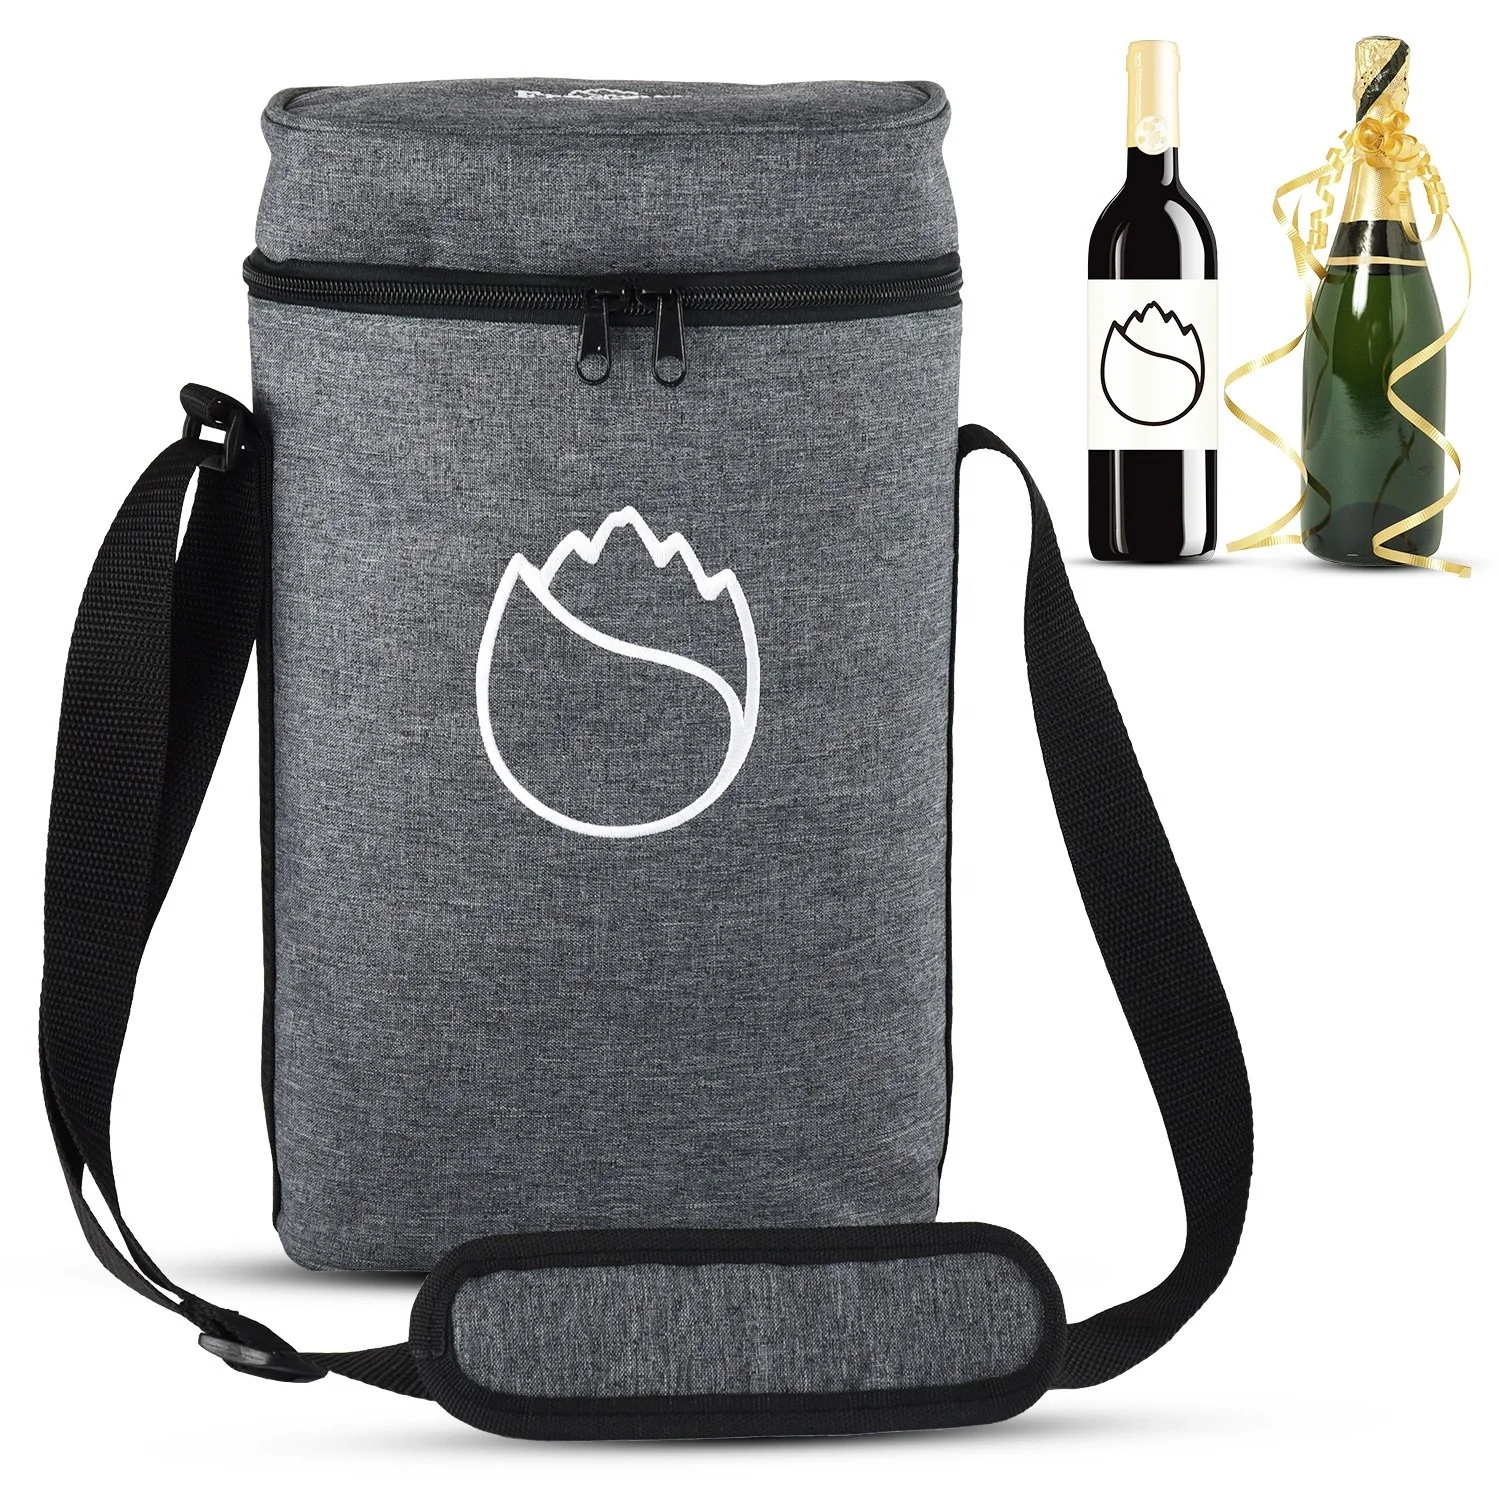 

2 bottle Insulated Wine Cooler Bag Padded Portable Versatile Wine Carrier Tote Bag with Shoulder Strap for Picnic, Customized color